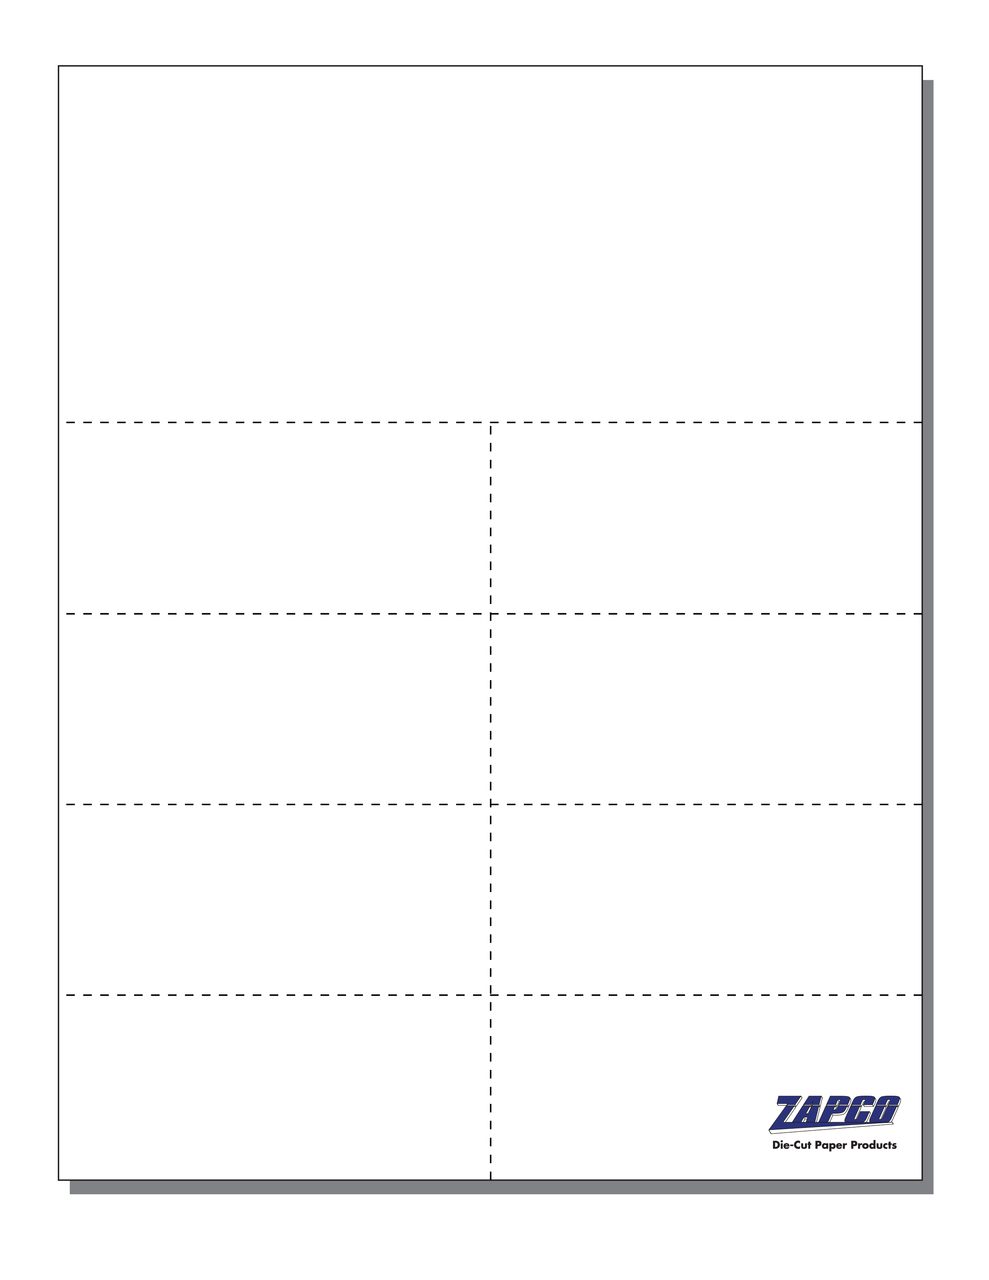 Item 110: 1-Up 3 3/4" x 8 1/2" Mailer with 8 Perforated Coupon Pieces 8 1/2" x 11" Sheet(250 Sheets)